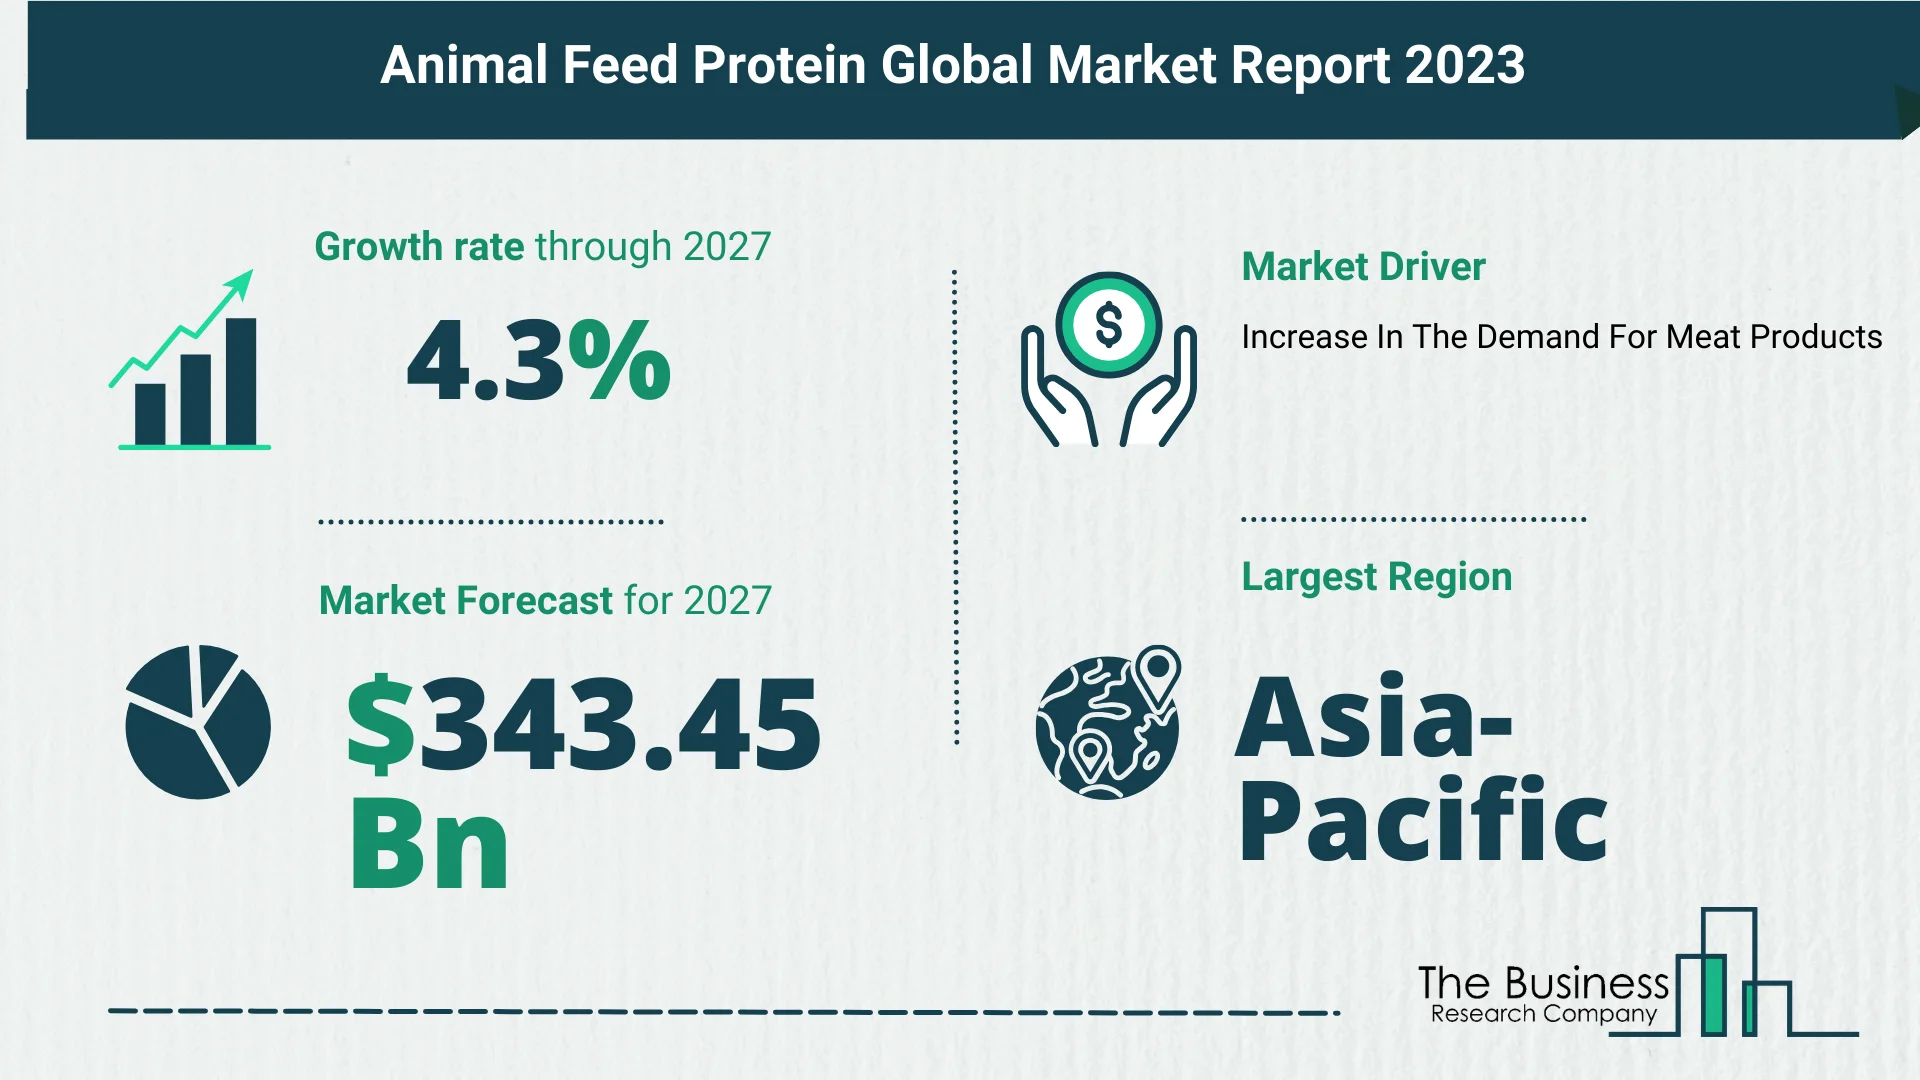 Global Animal Feed Protein Market Size